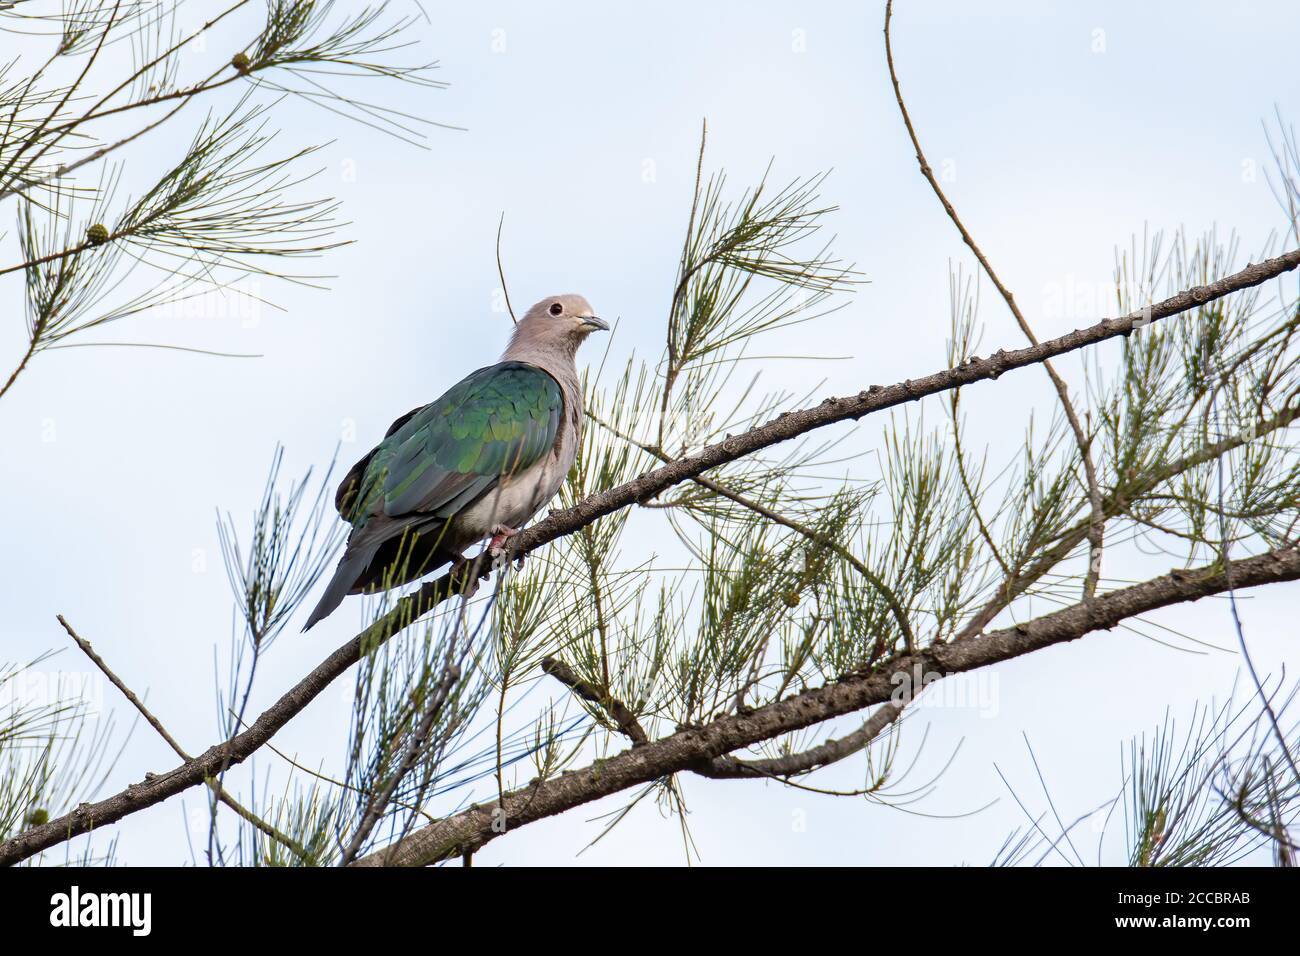 Green Imperial Pigeon (Ducula aenea) perched on a branch in nature habitats Stock Photo